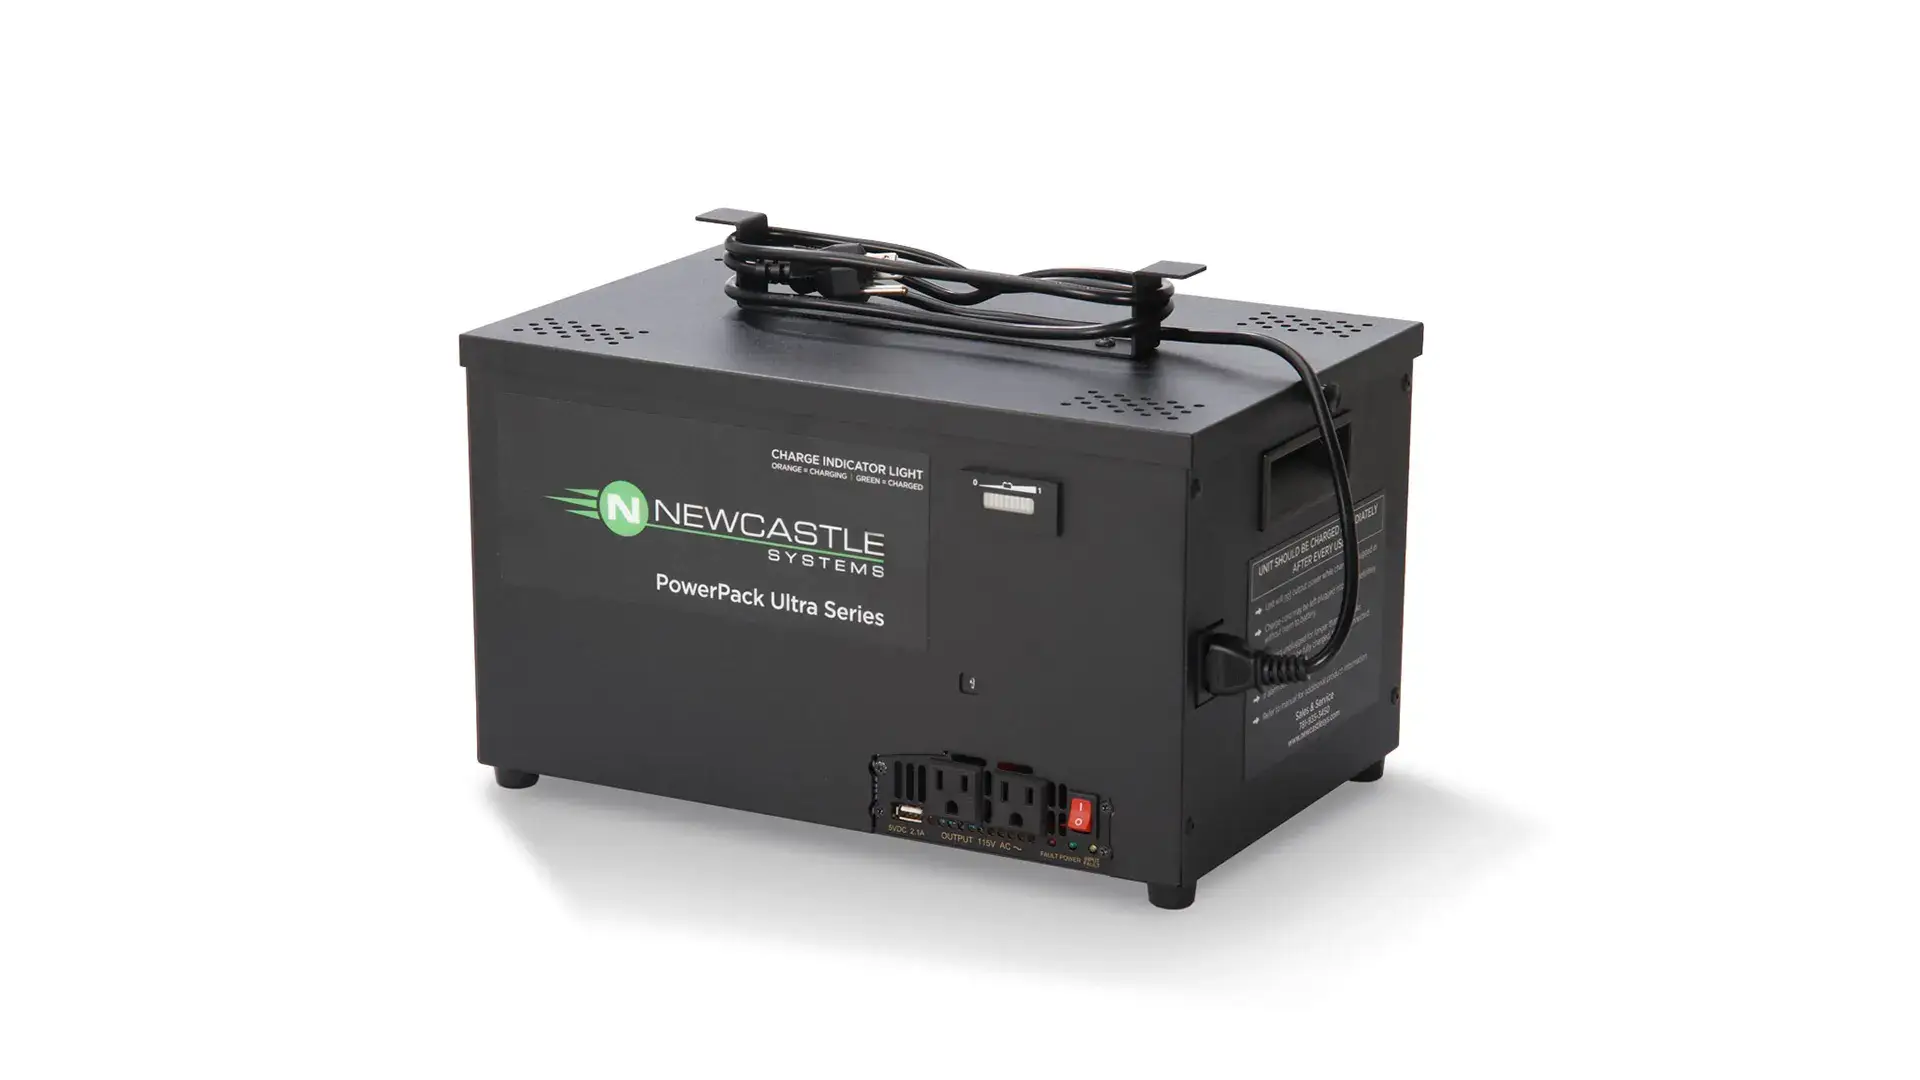 Newcastle PowerPack System